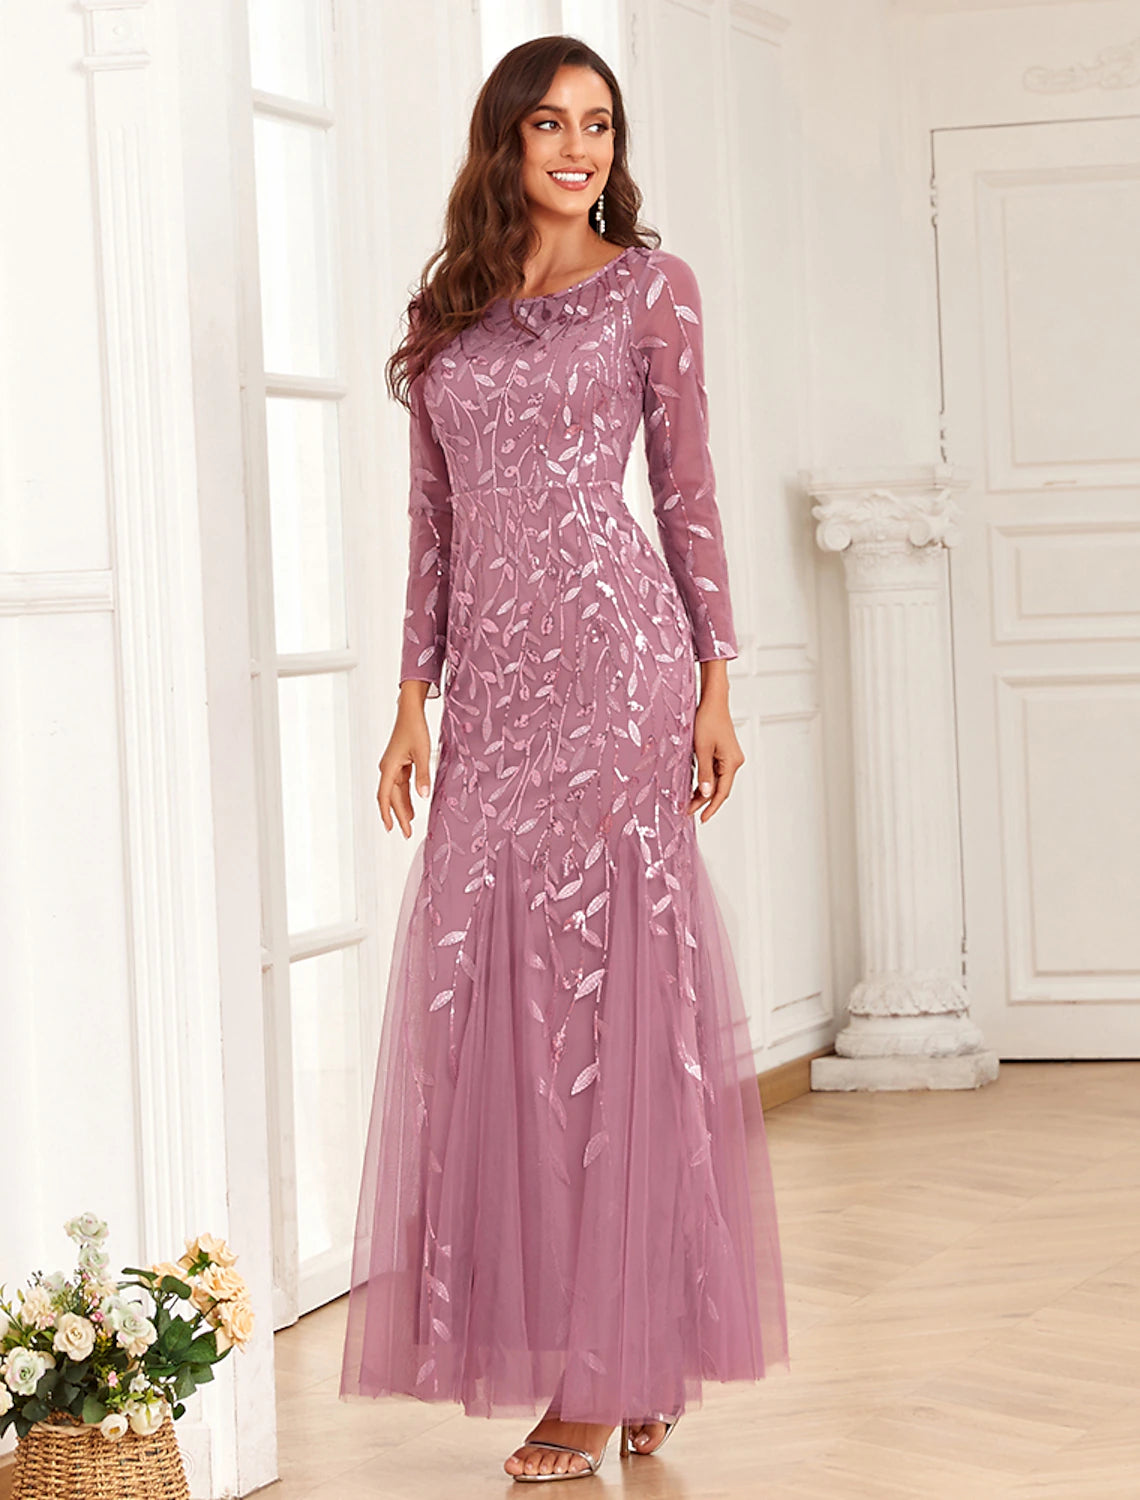 Mermaid / Trumpet Evening Gown Elegant Dress Prom Wedding Party Floor Length Long Sleeve Jewel Neck Tulle with Embroidery